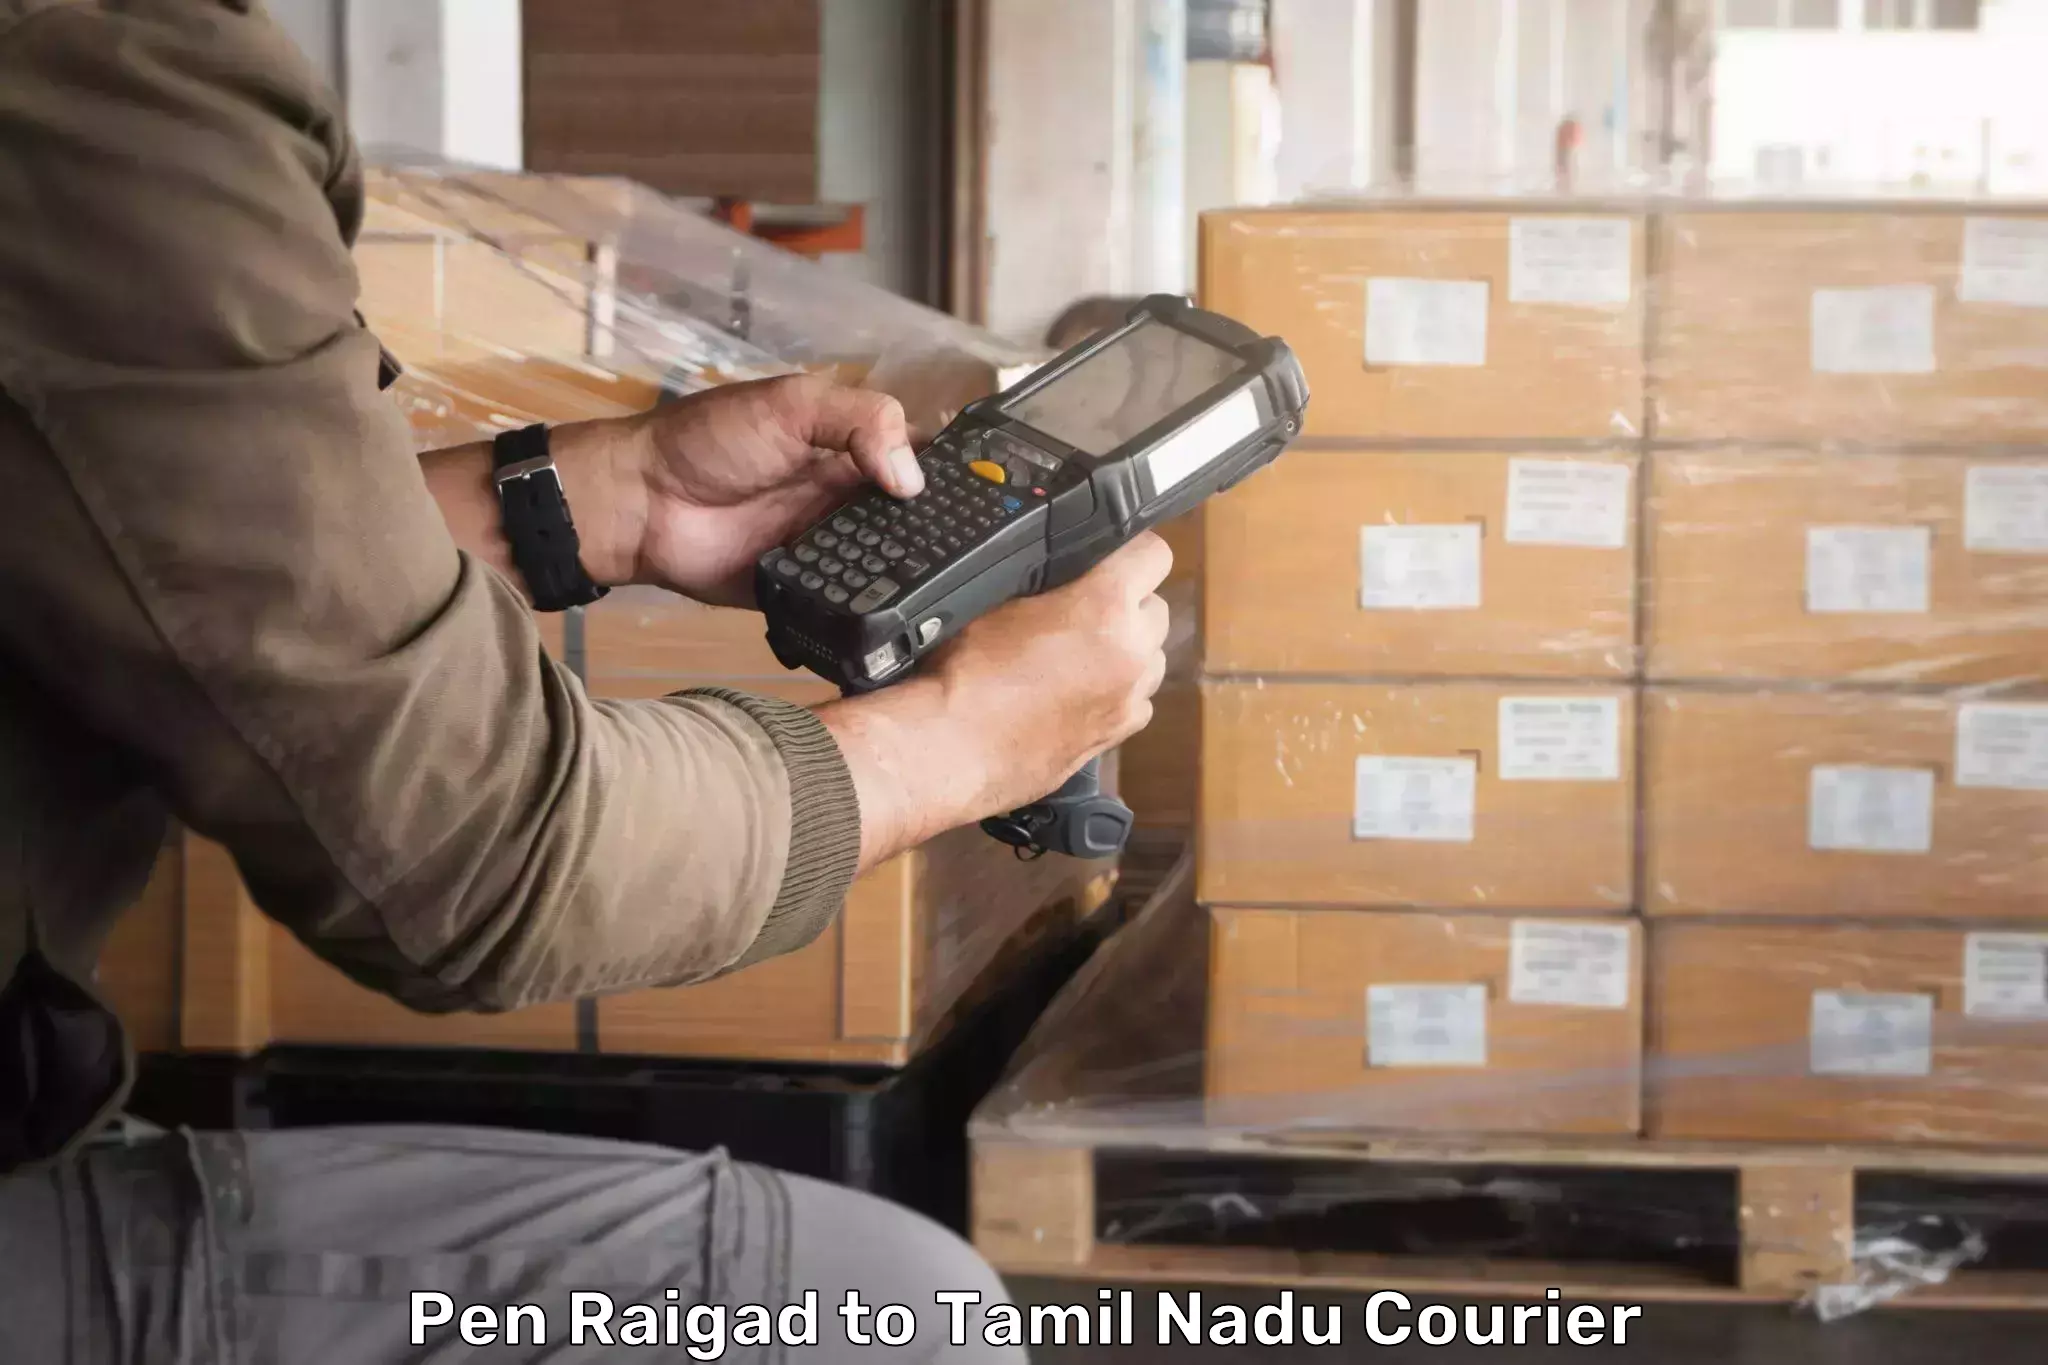 Easy access courier services Pen Raigad to Tamil Nadu